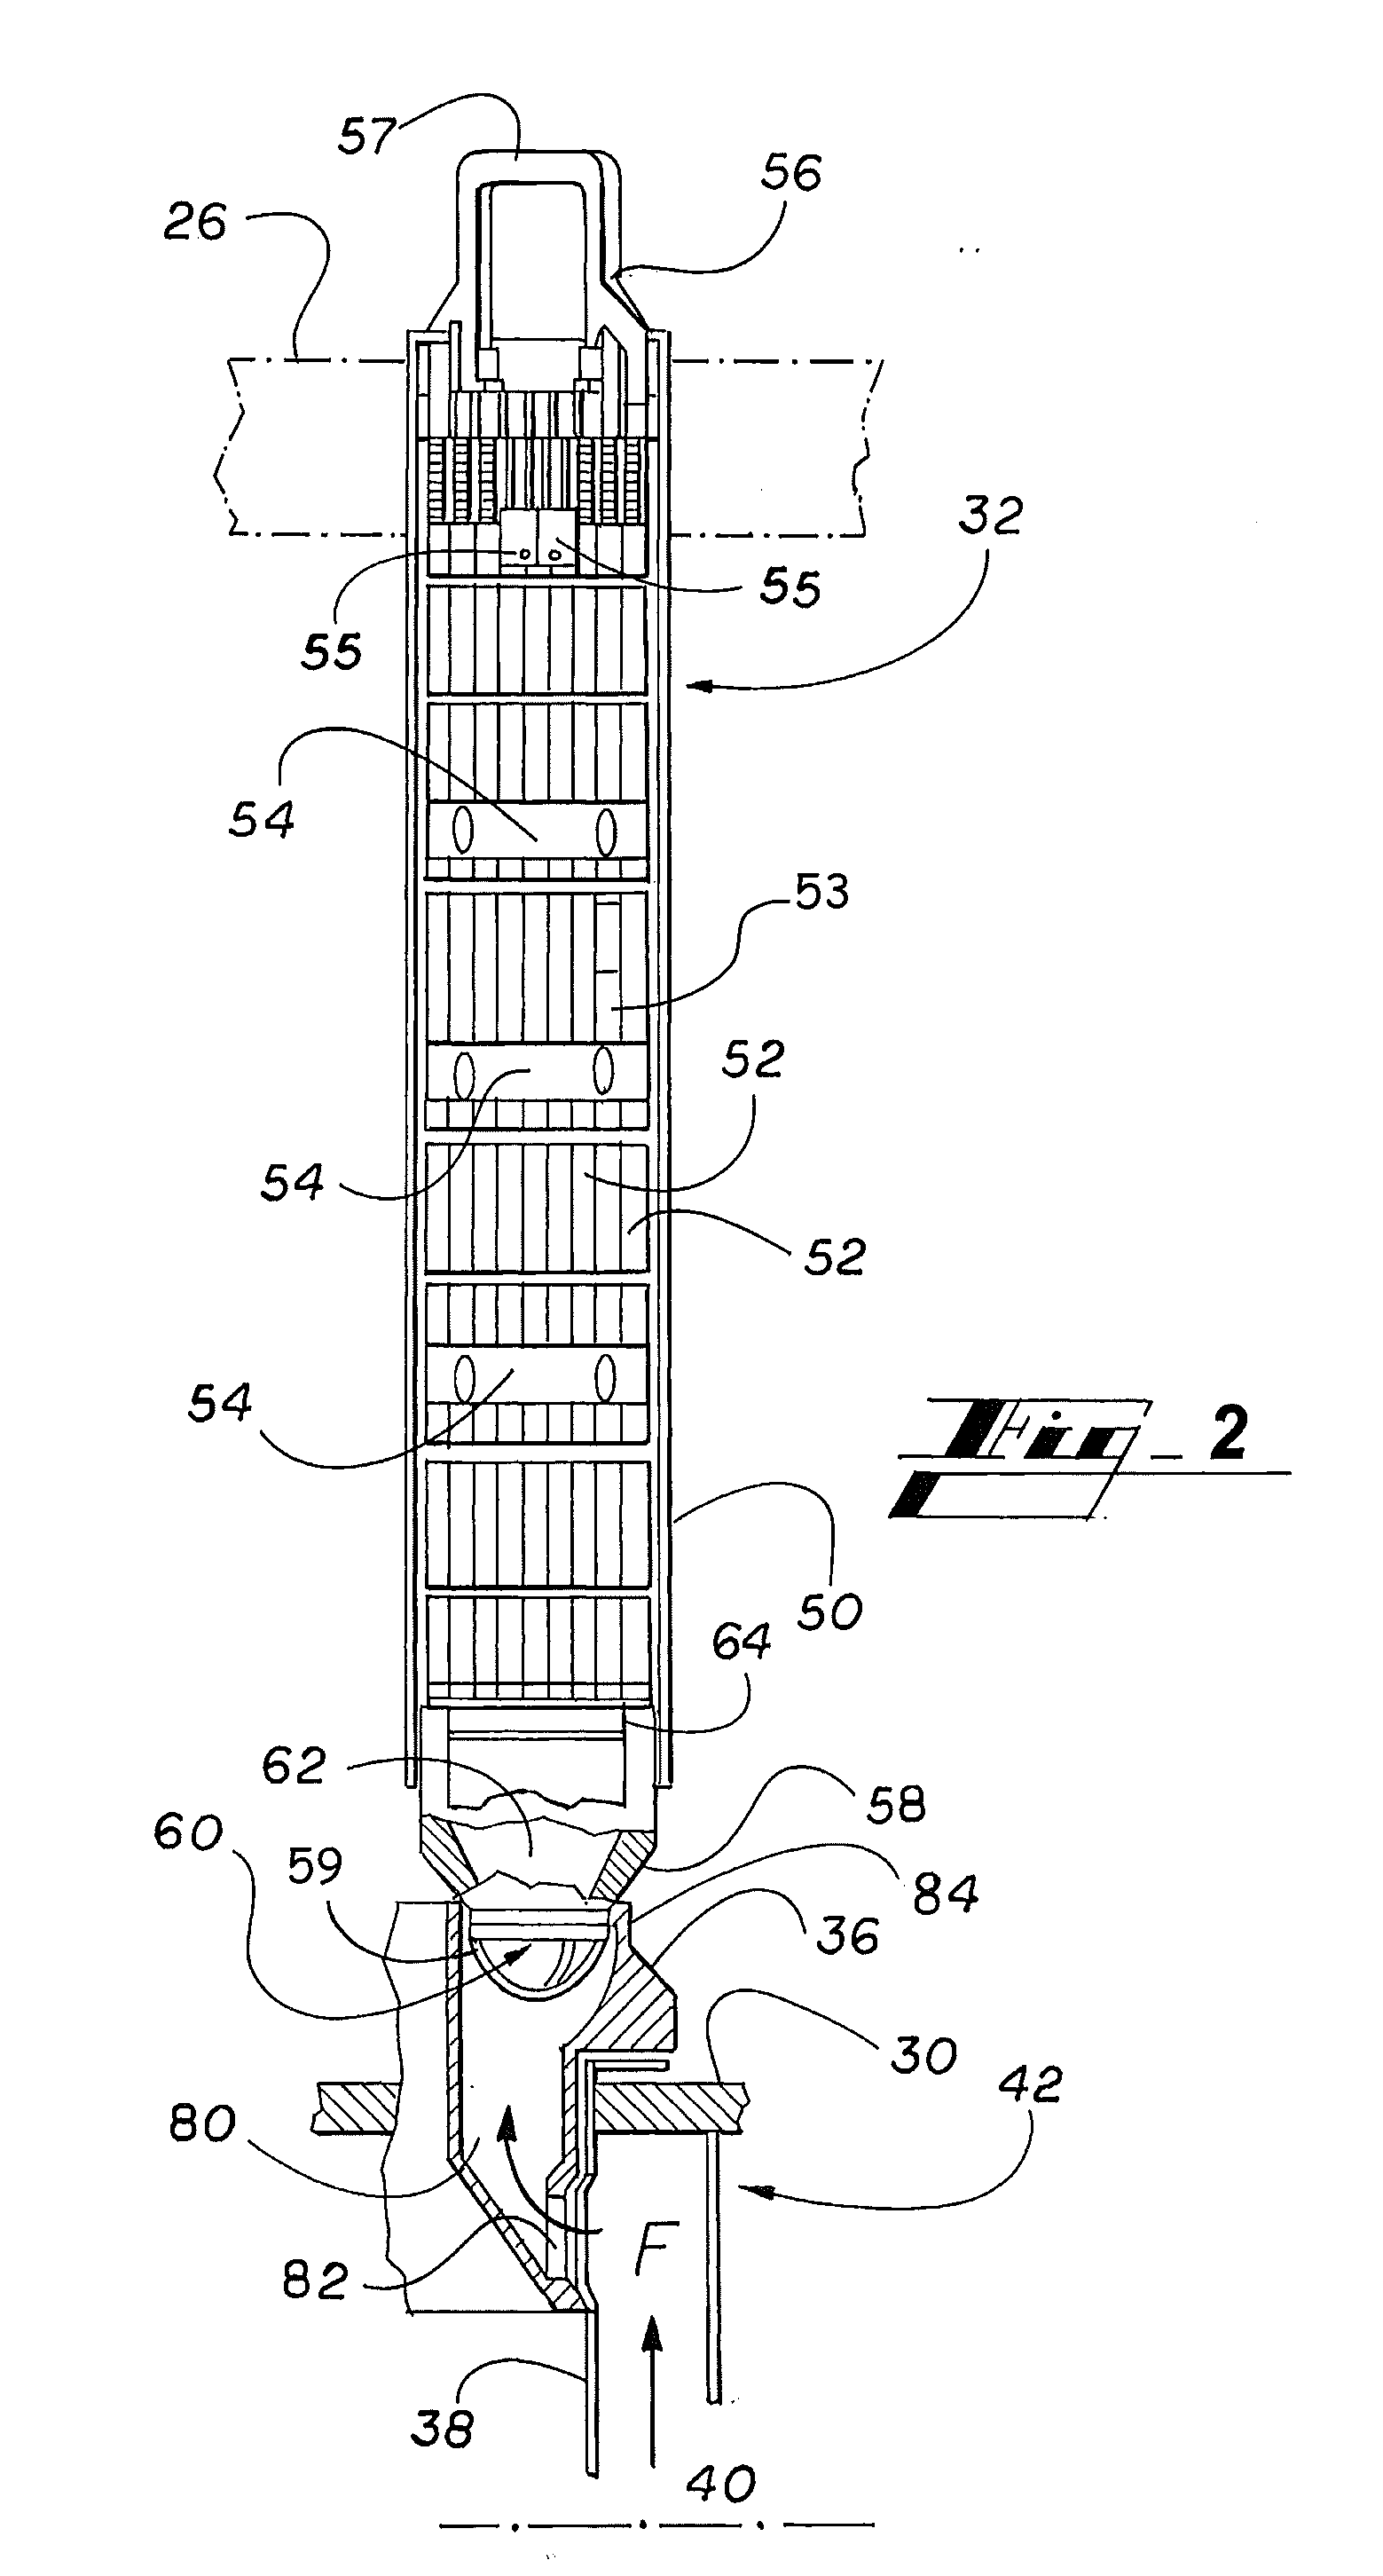 Debris Exclusion and Retention Device for a Fuel Assembly